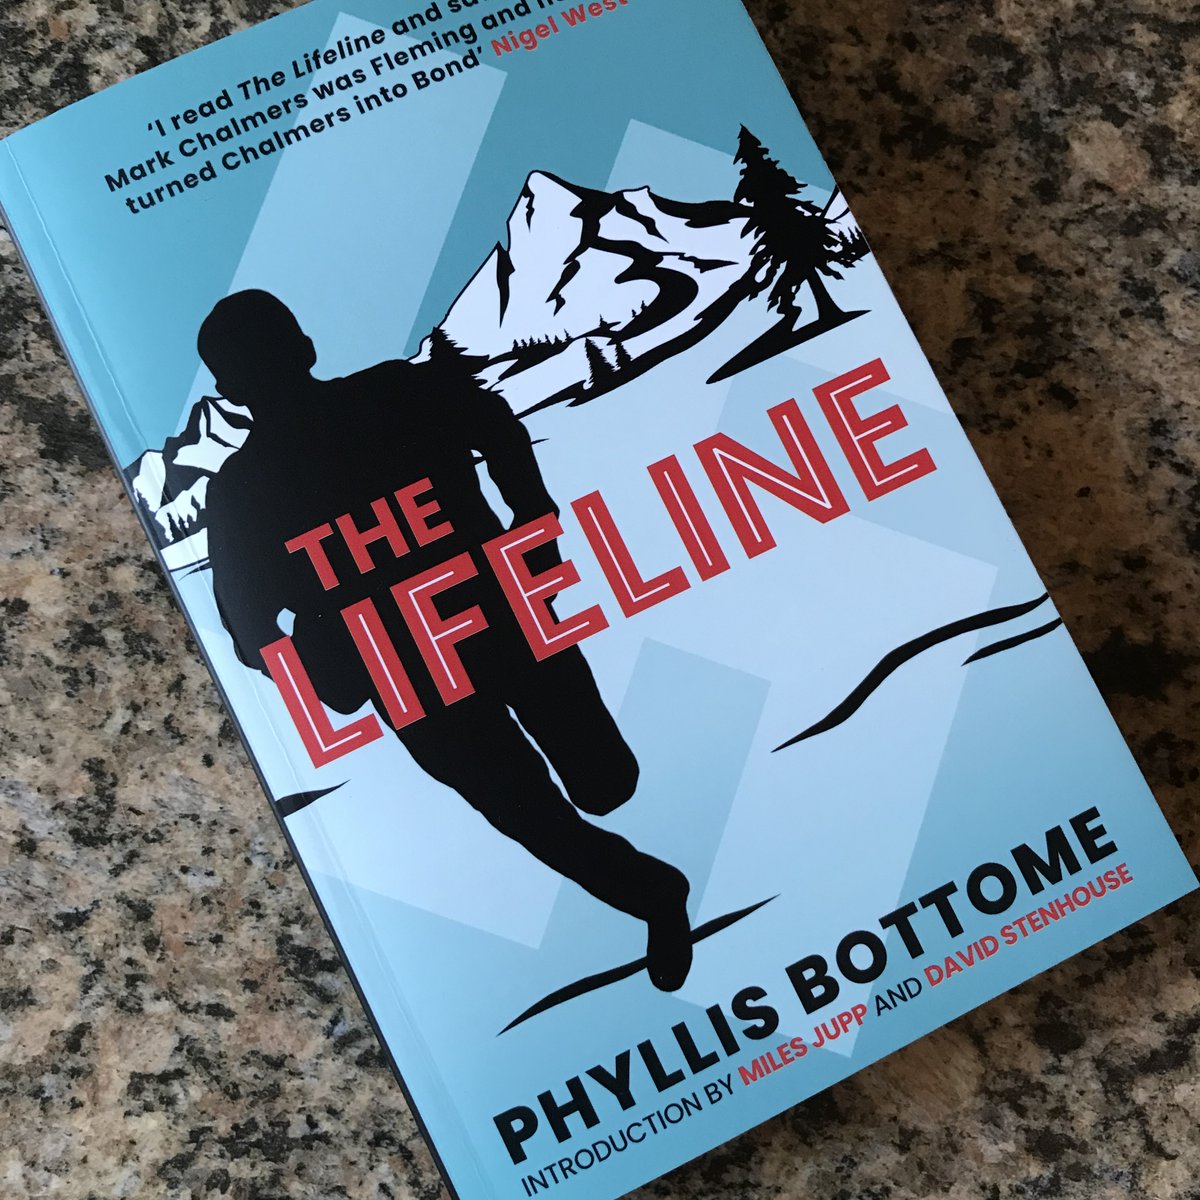 SATURDAY DRAW: Today you can win The Lifeline by Phyllis Bottome - an espionage classic from 1946 republished by @MuswellPress. facebook.com/CrimeFictionLo… Be in it to win it!